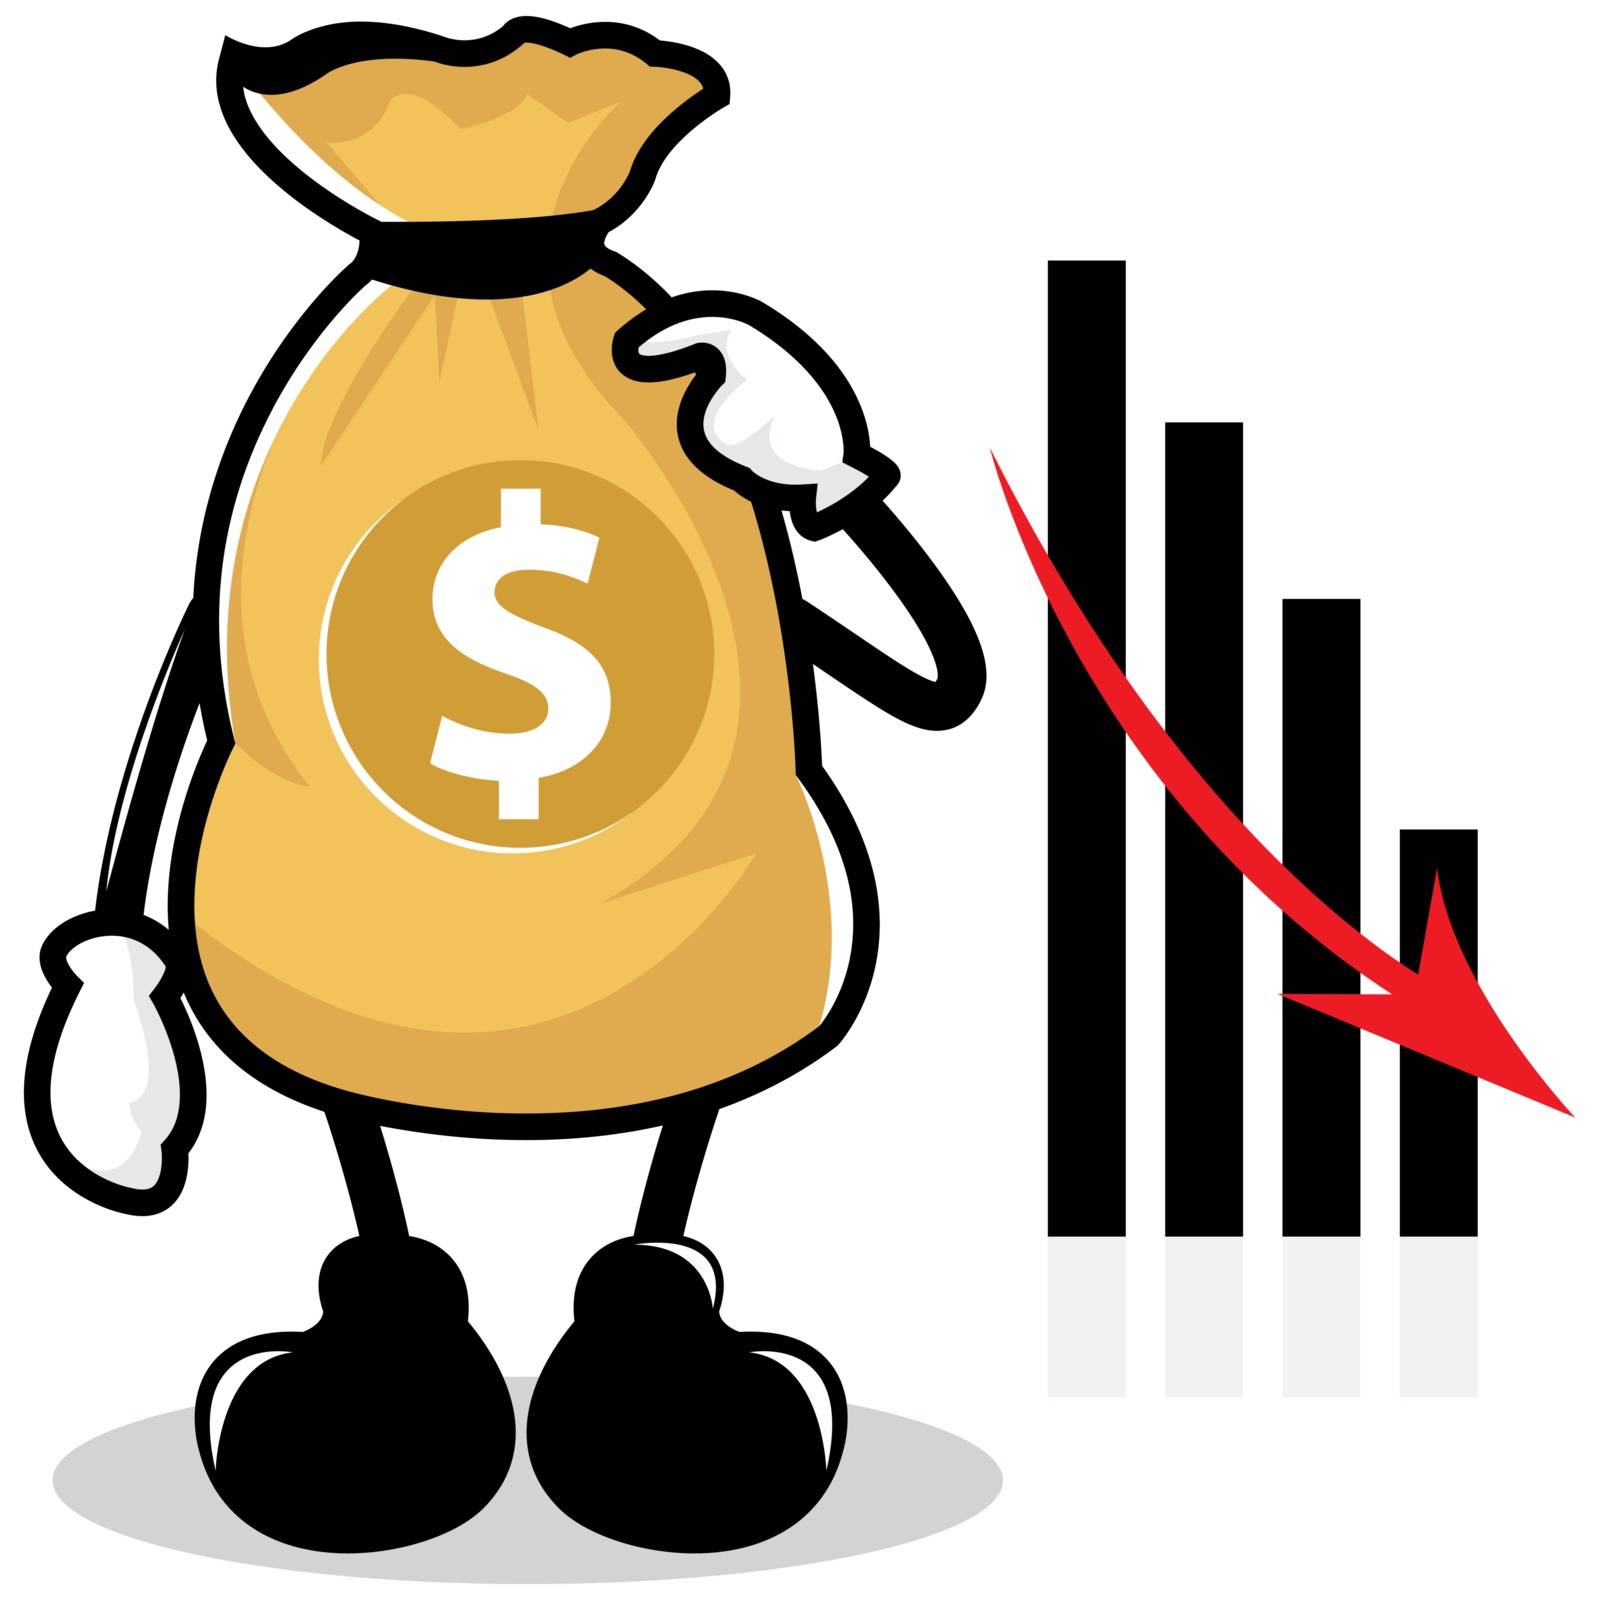 Illustration of Decreased Profits with Money Bag Character by Ianisme28